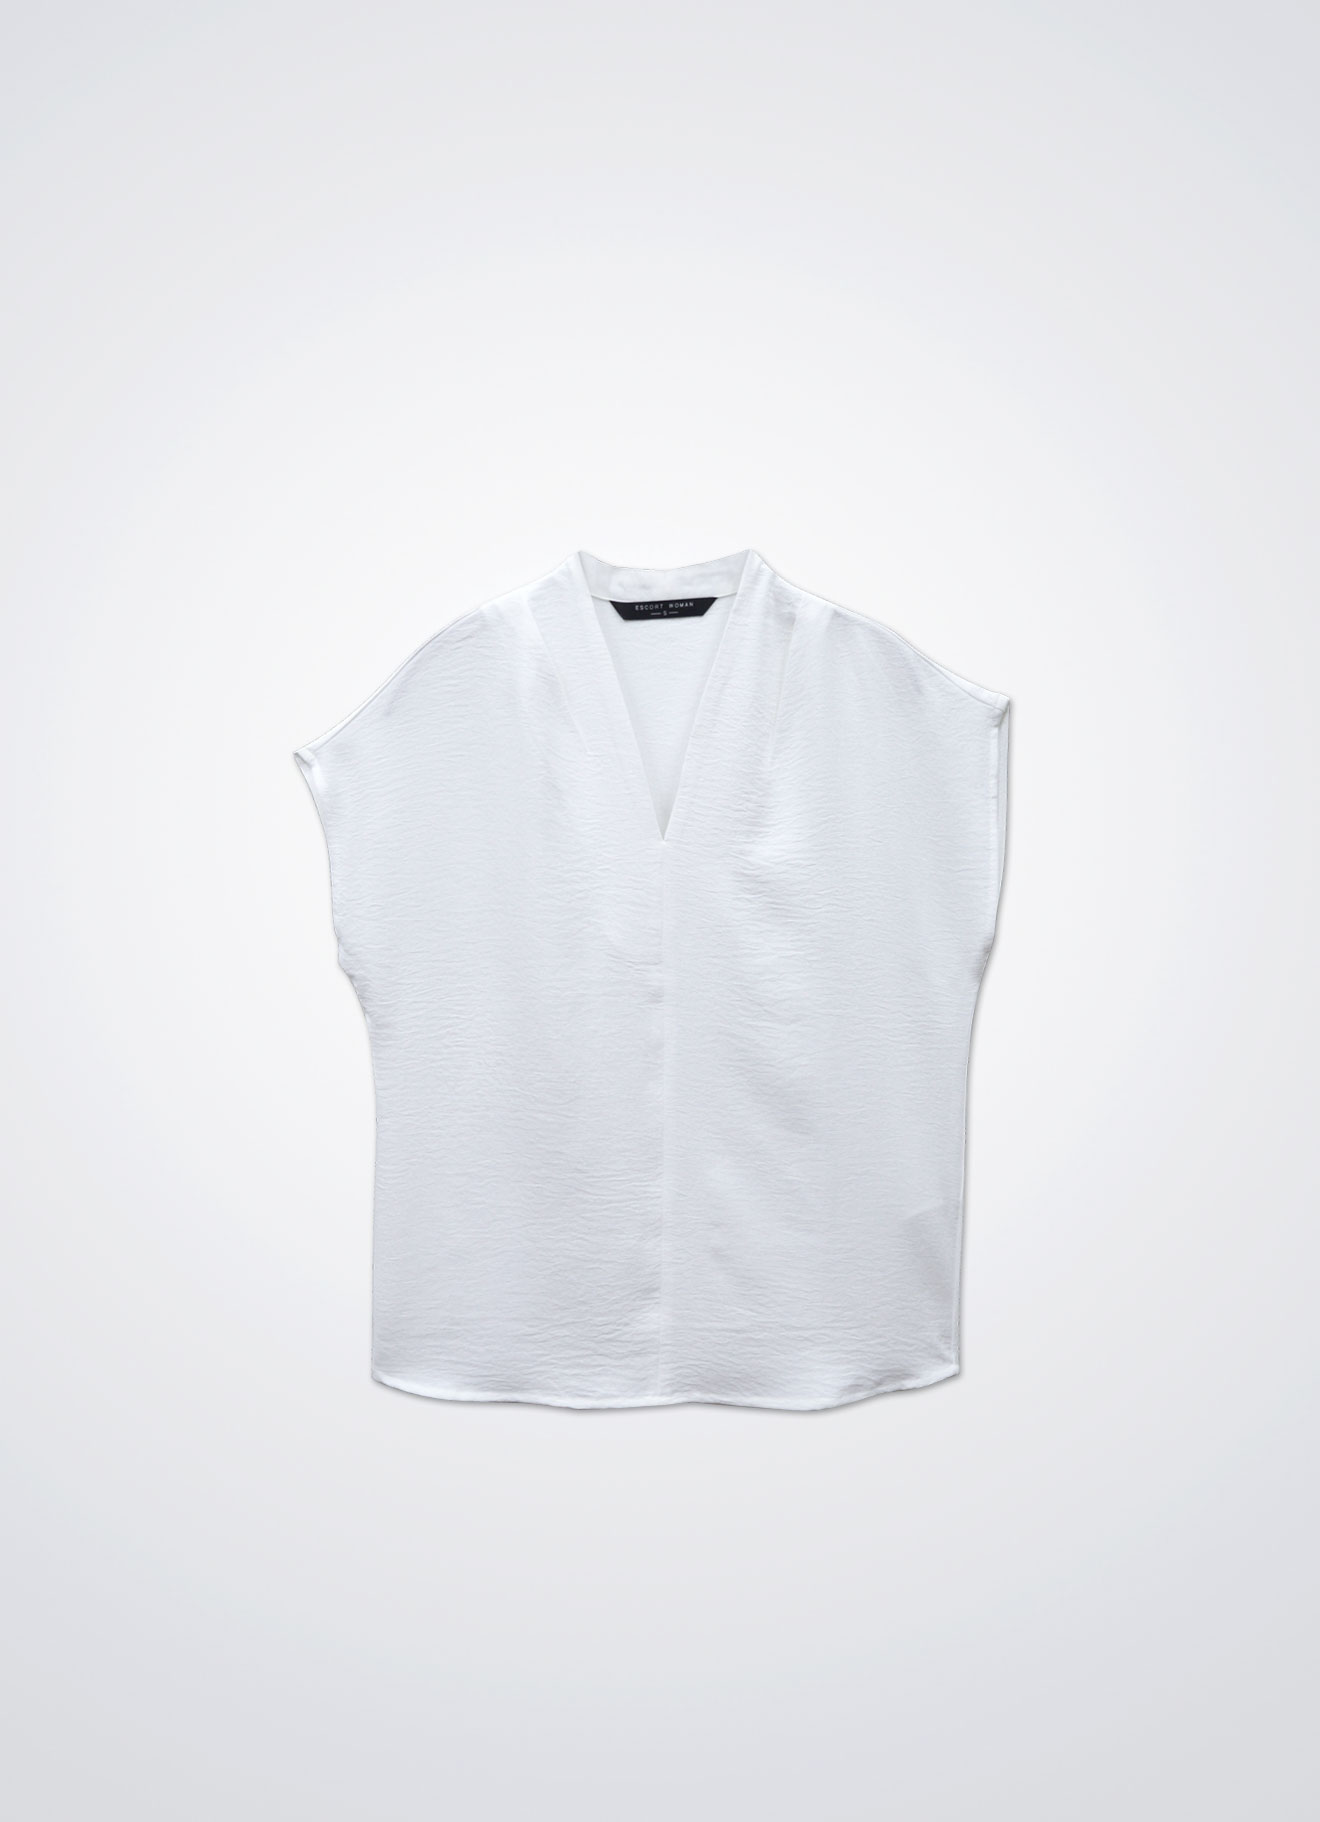 Bright-White by Sleeve Top